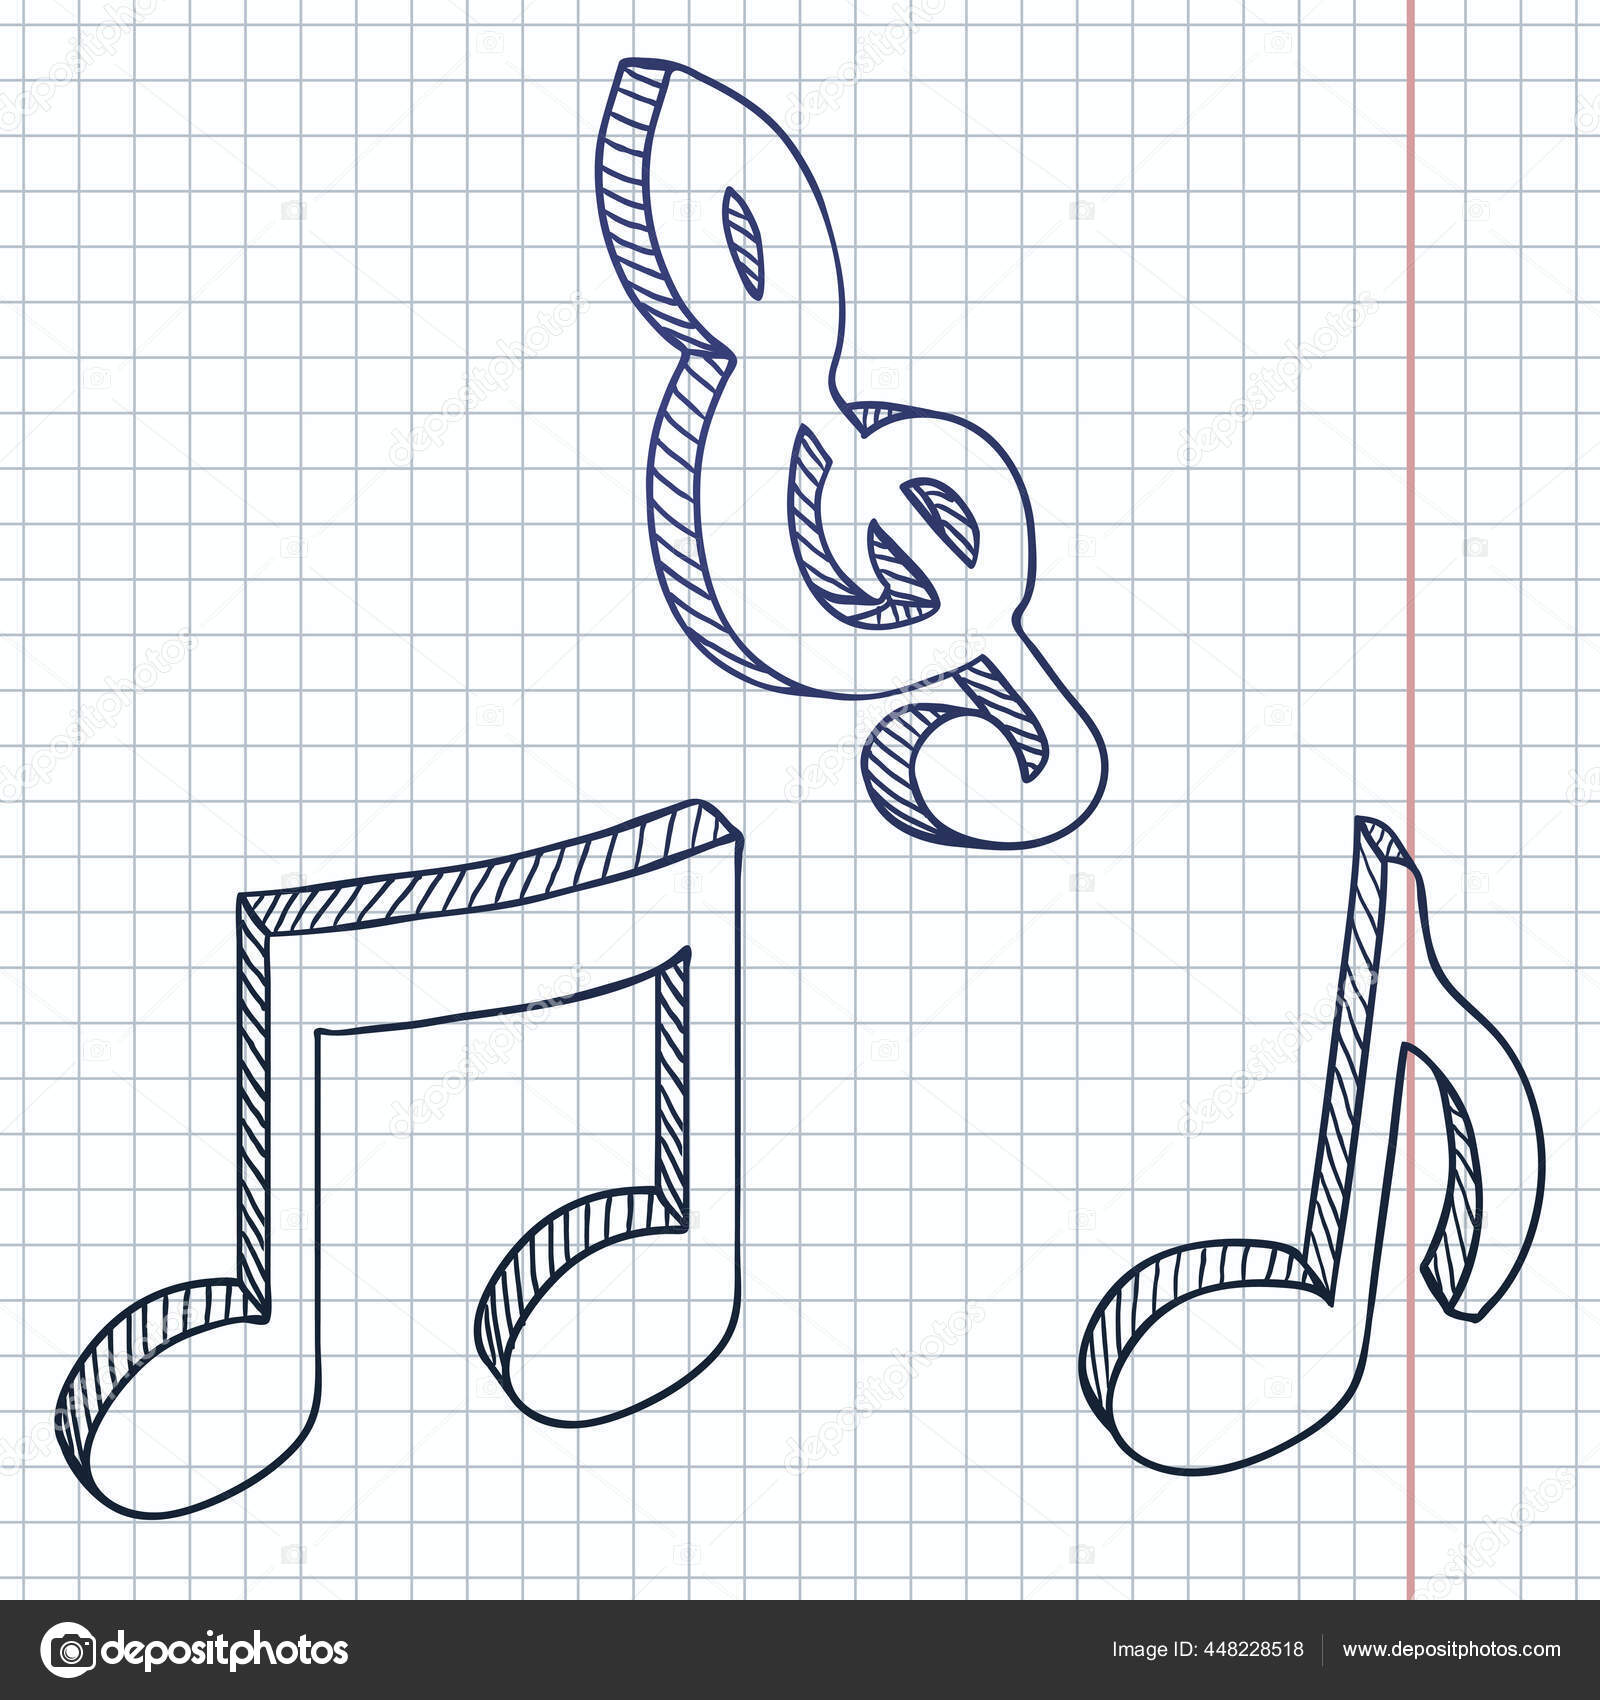 15 Easy Music Notes Drawing Ideas - How to Draw